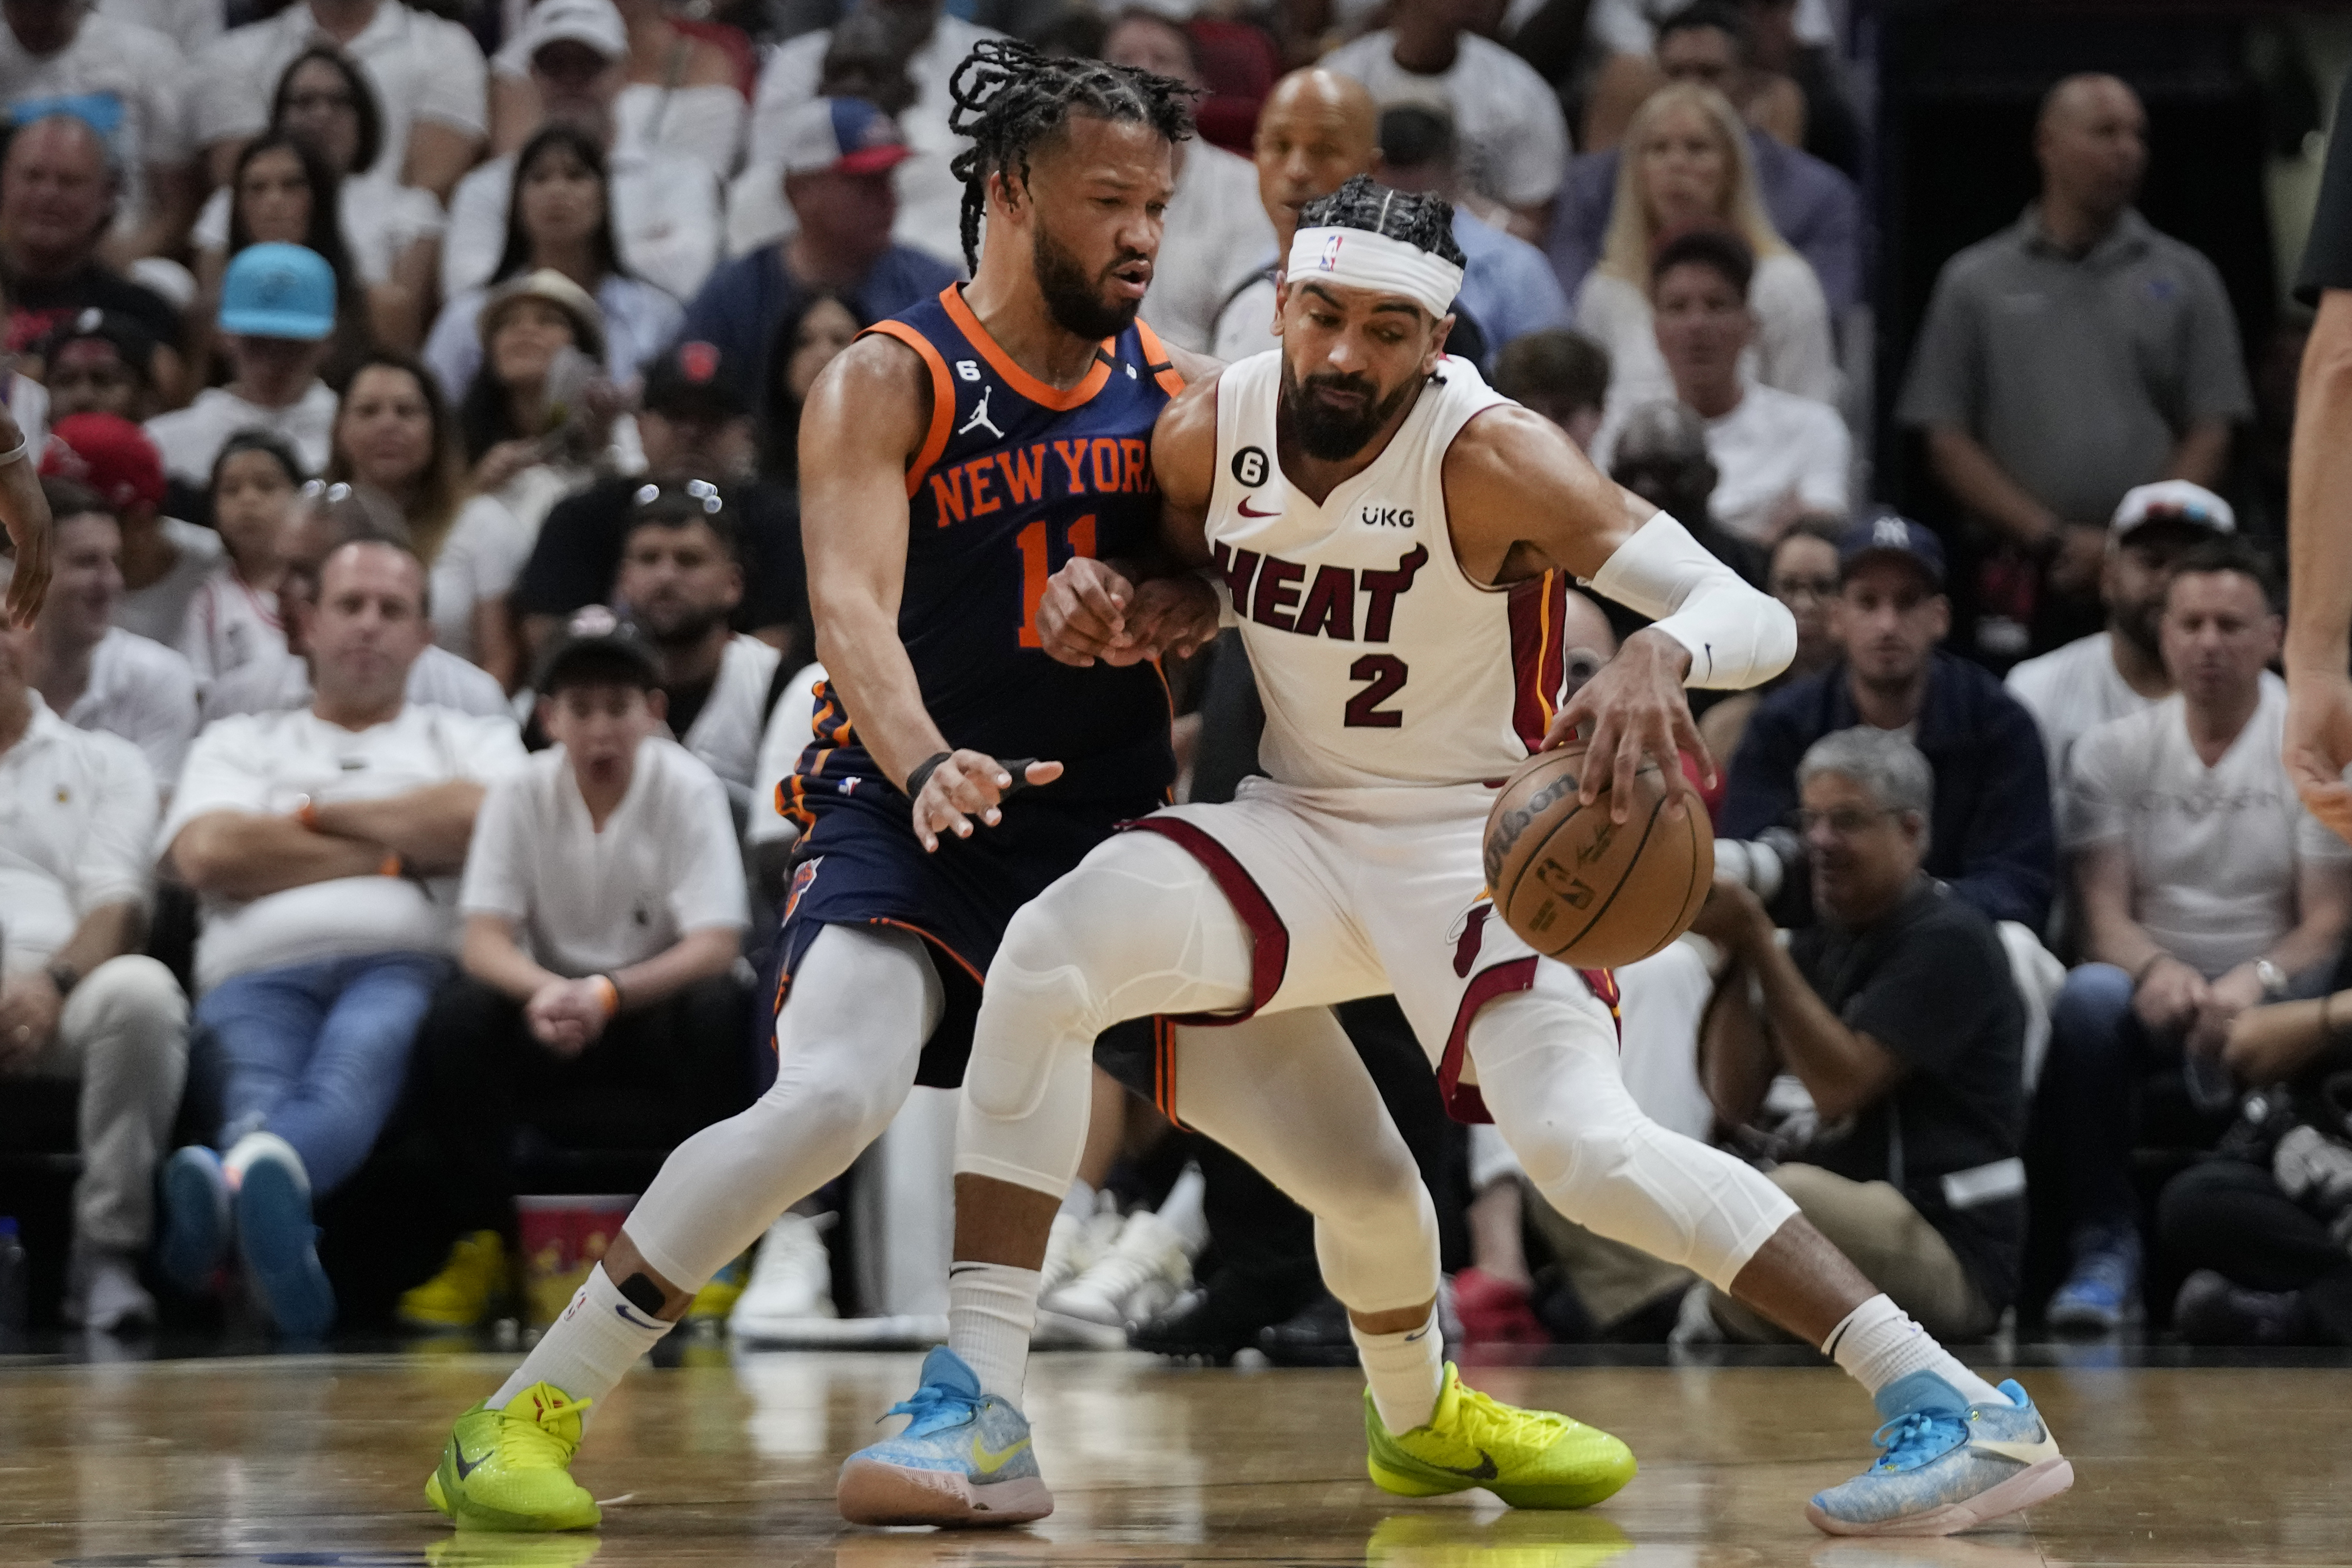 Miami Heat guard Gabe Vincent (2) drives up against New York Knicks guard Jalen Brunson (11) during the first half of Game 3 of an NBA basketball second-round playoff series, Saturday, May 6, 2023, in Miami. (AP Photo/Wilfredo Lee)